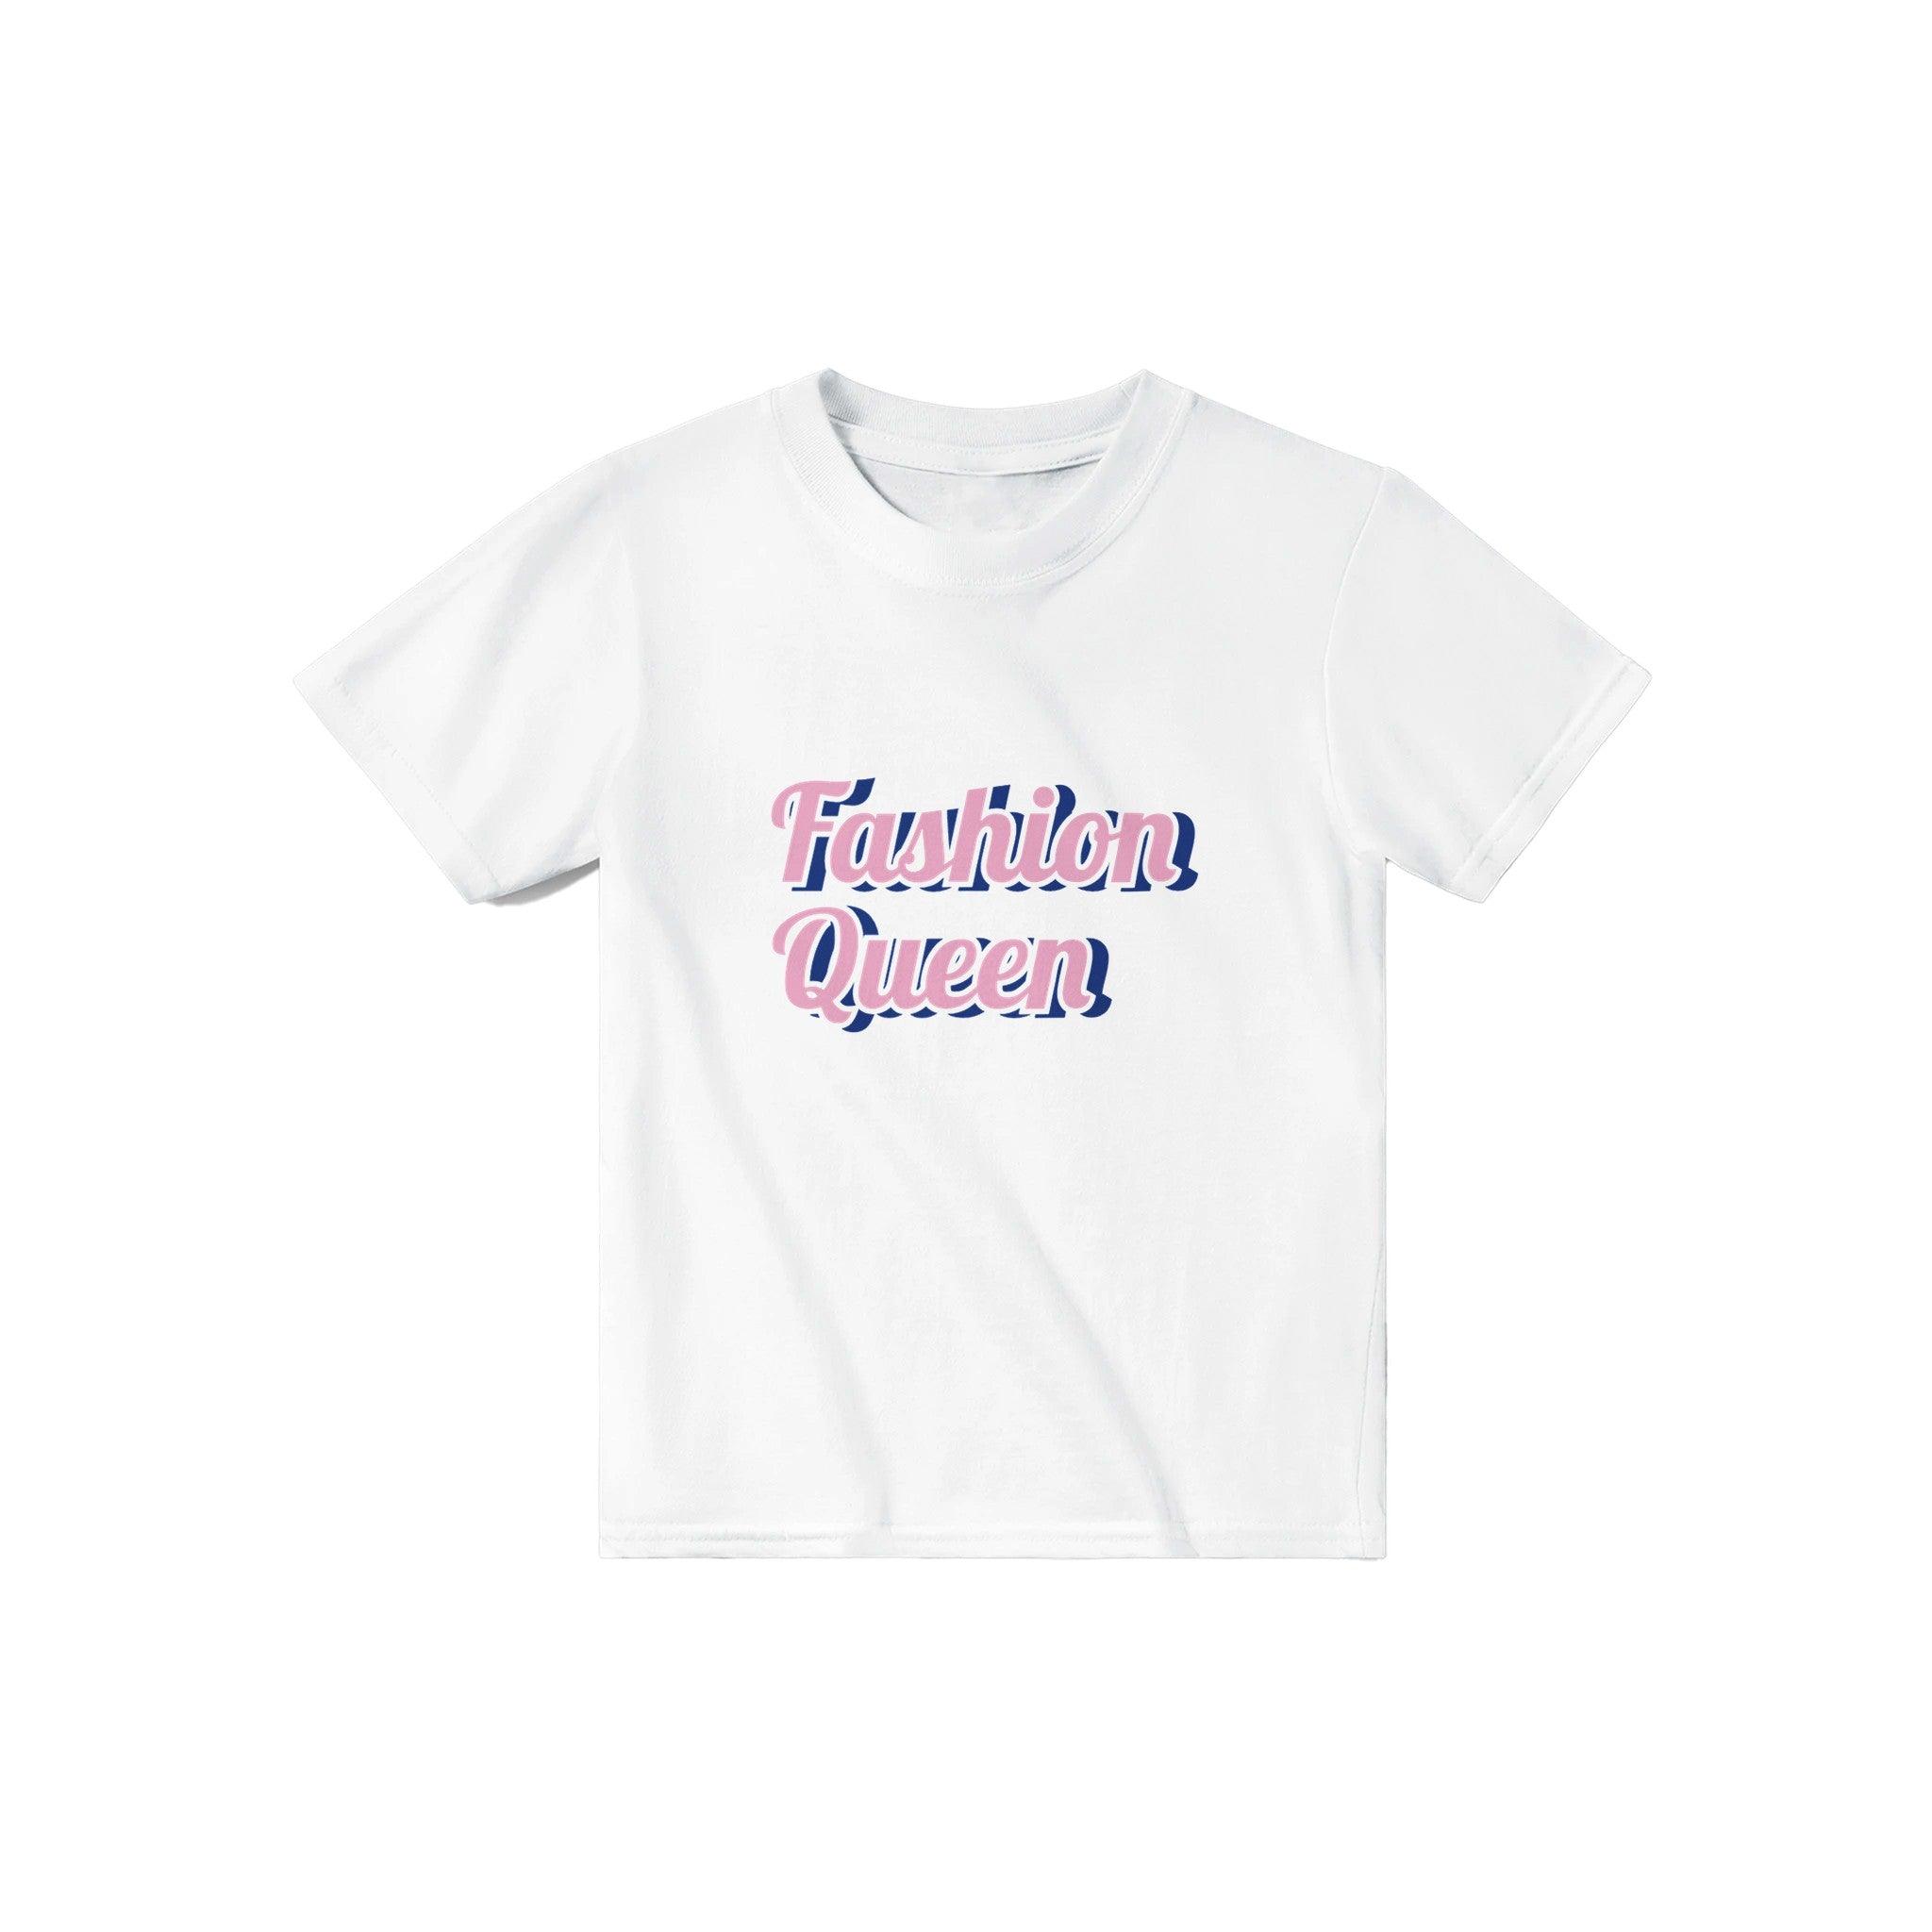 'Fashion Queen' Baby Tee - POMA